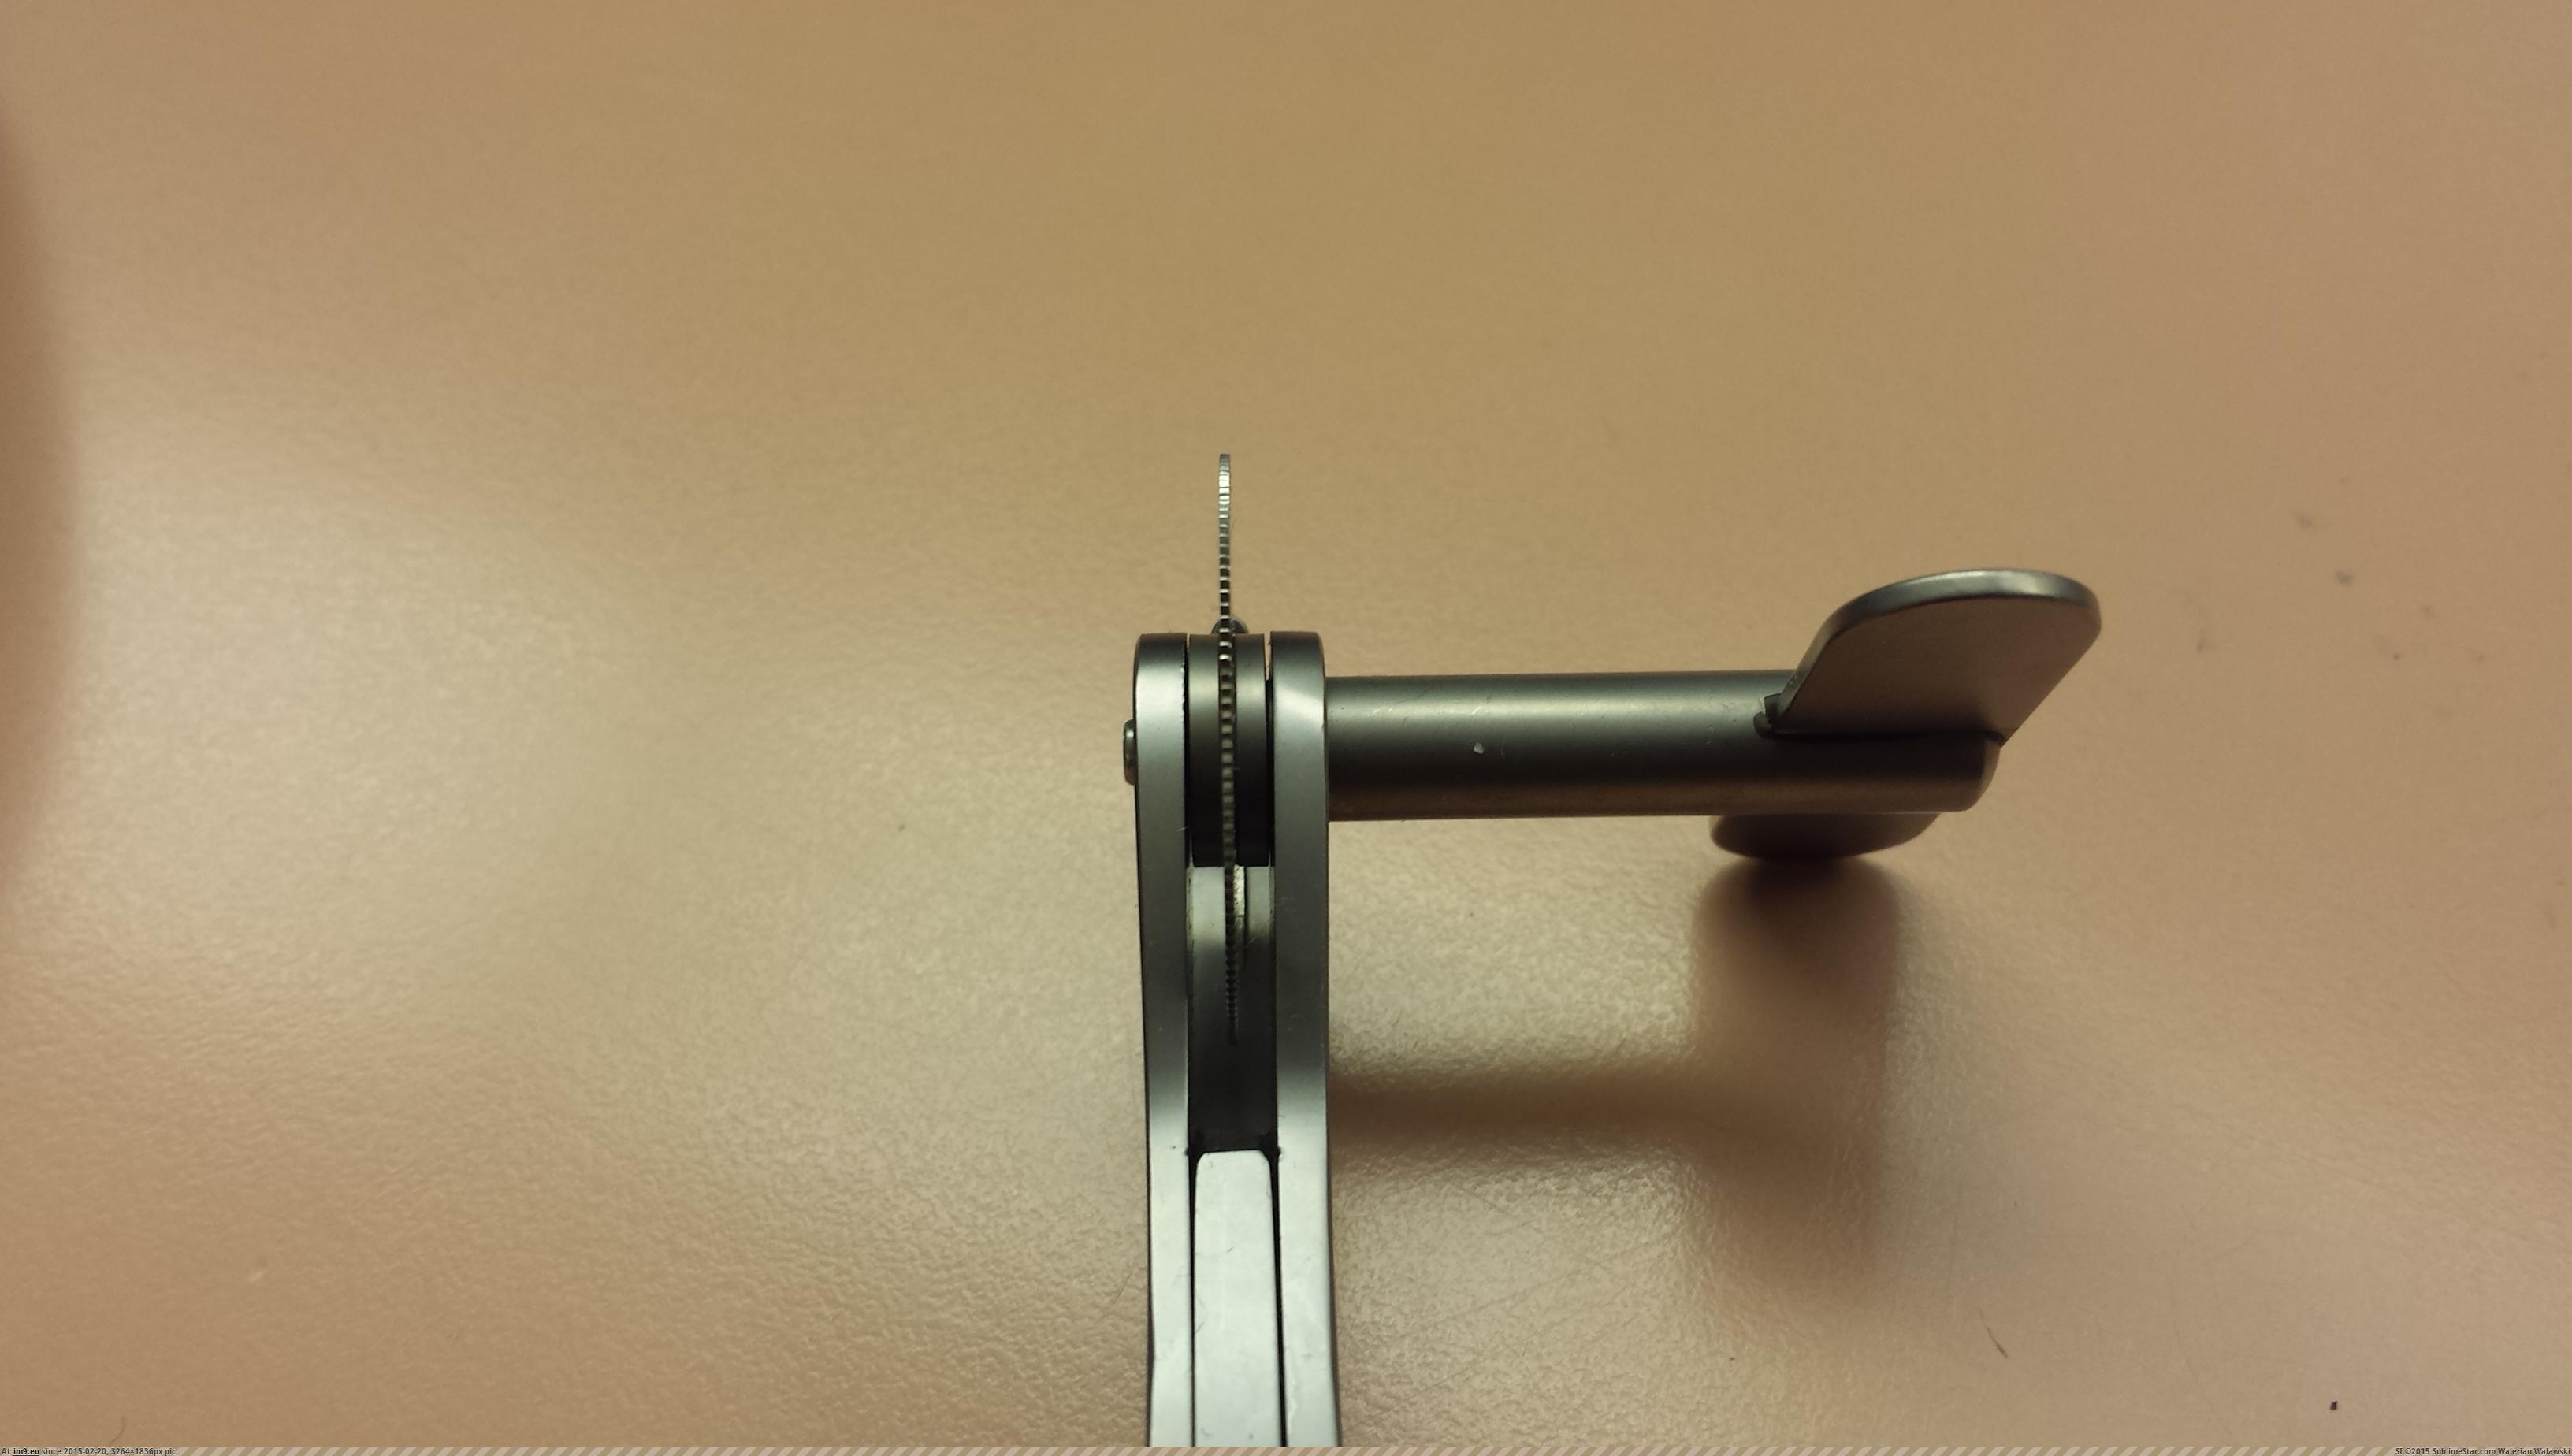 The tool we use in emergent situations to remove rings from fingers that  are too swollen. : r/mildlyinteresting